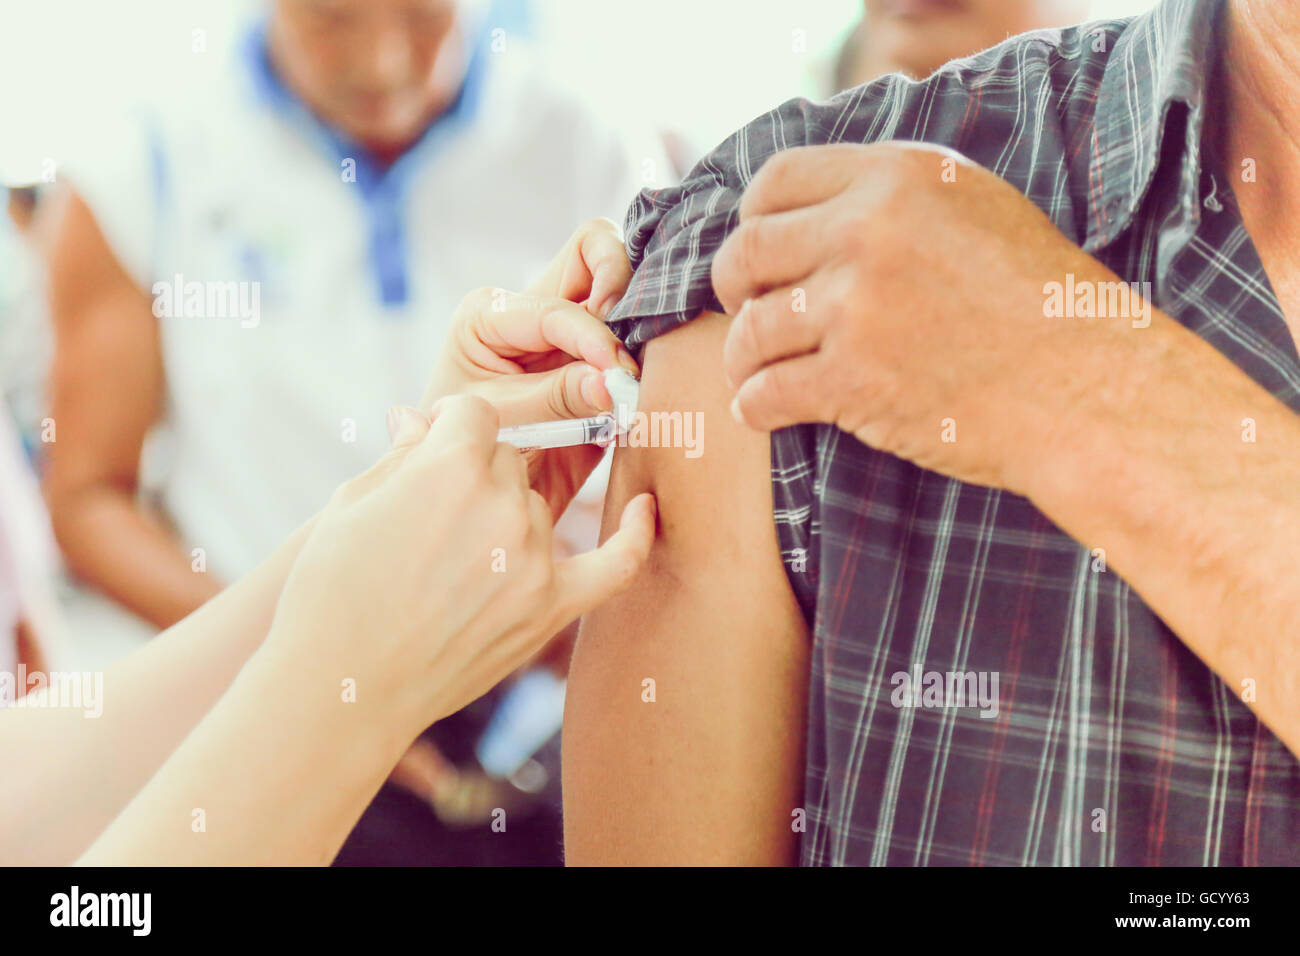 Shot of human hands making an injection with a syringe Stock Photo